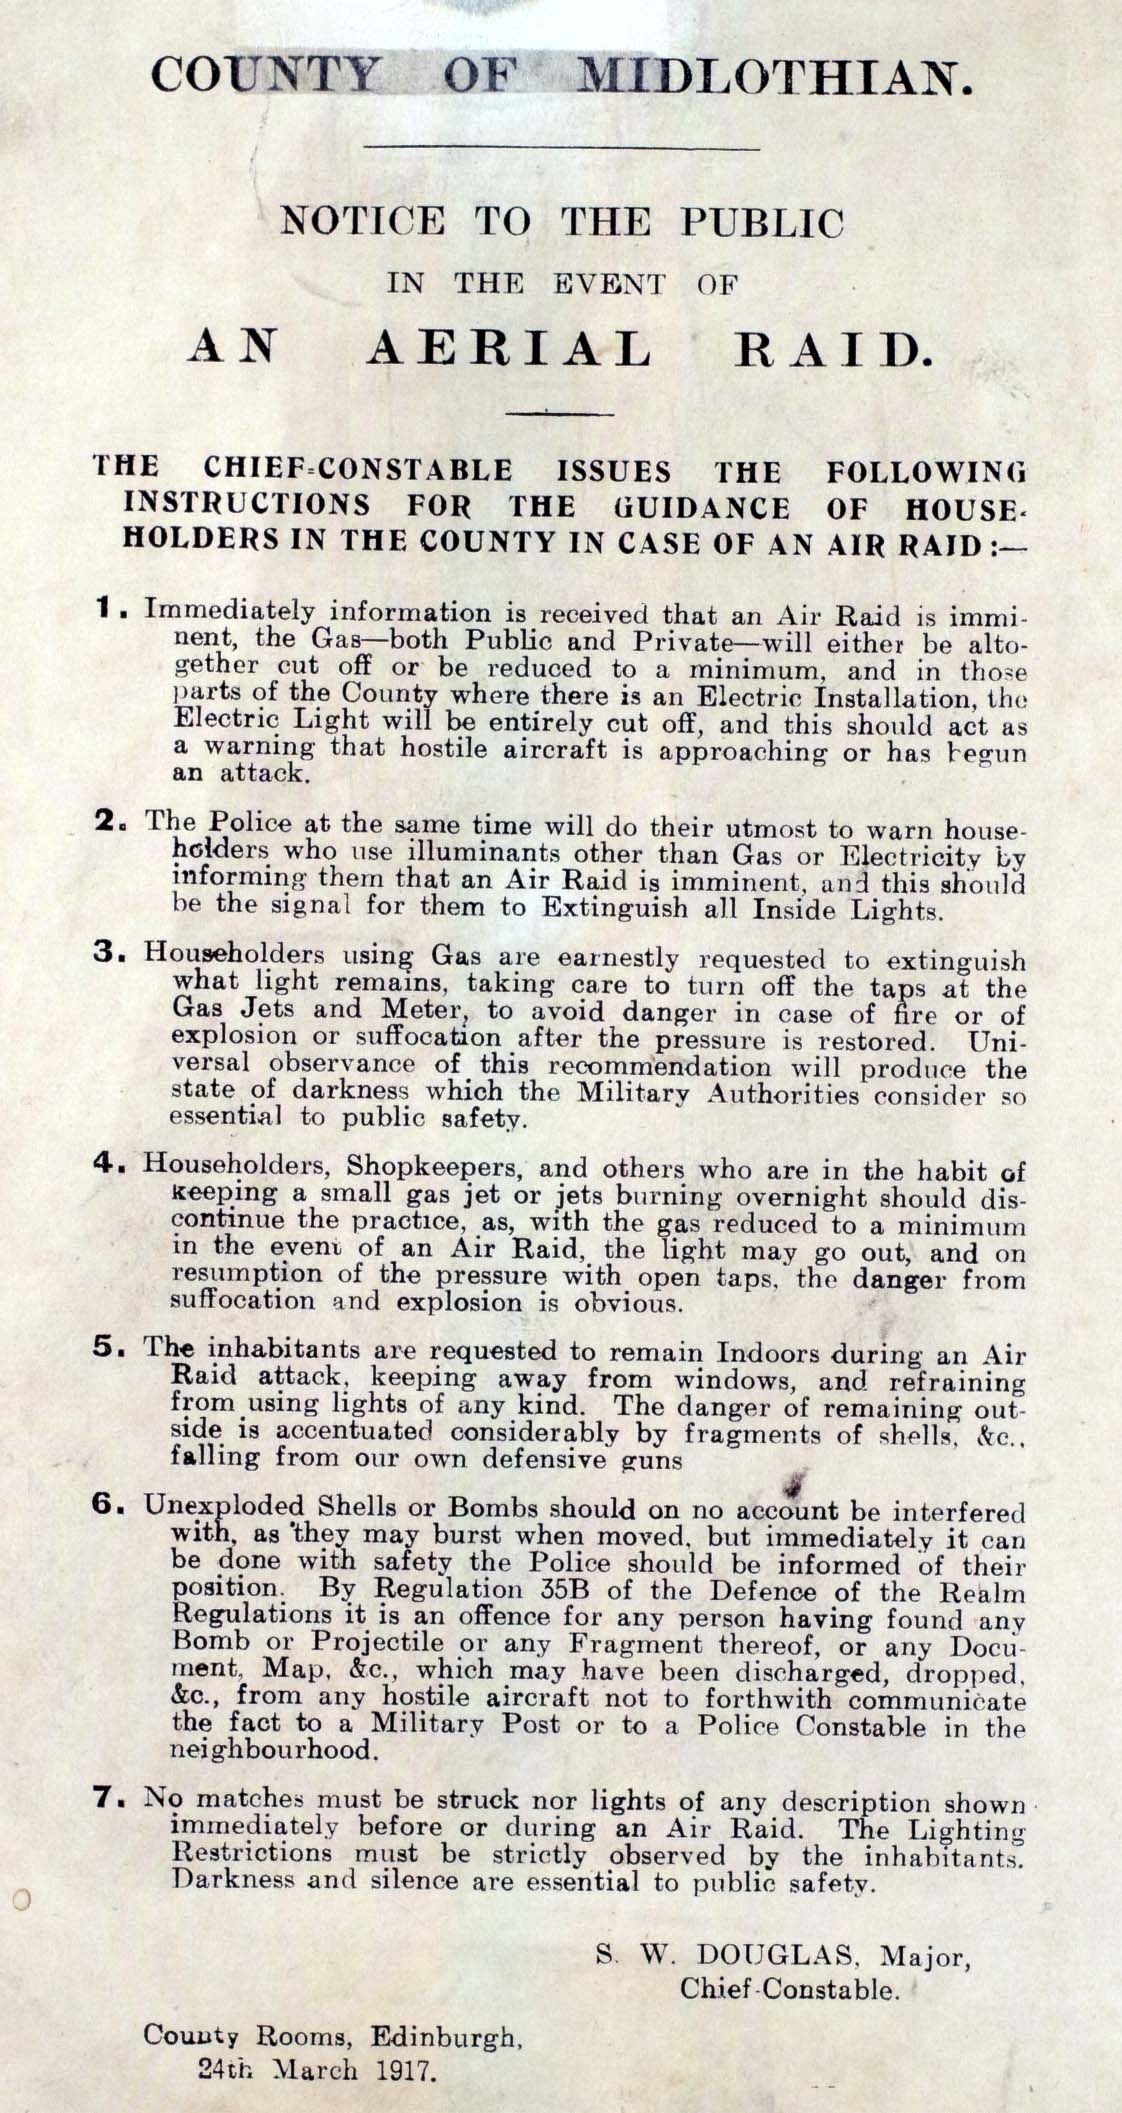 Guidance for the public in the event of an air raid issued 24 March 1917, National Records of Scotland, GD18/6182. Reproduced by kind permission of Sir Robert Clerk of Penicuik